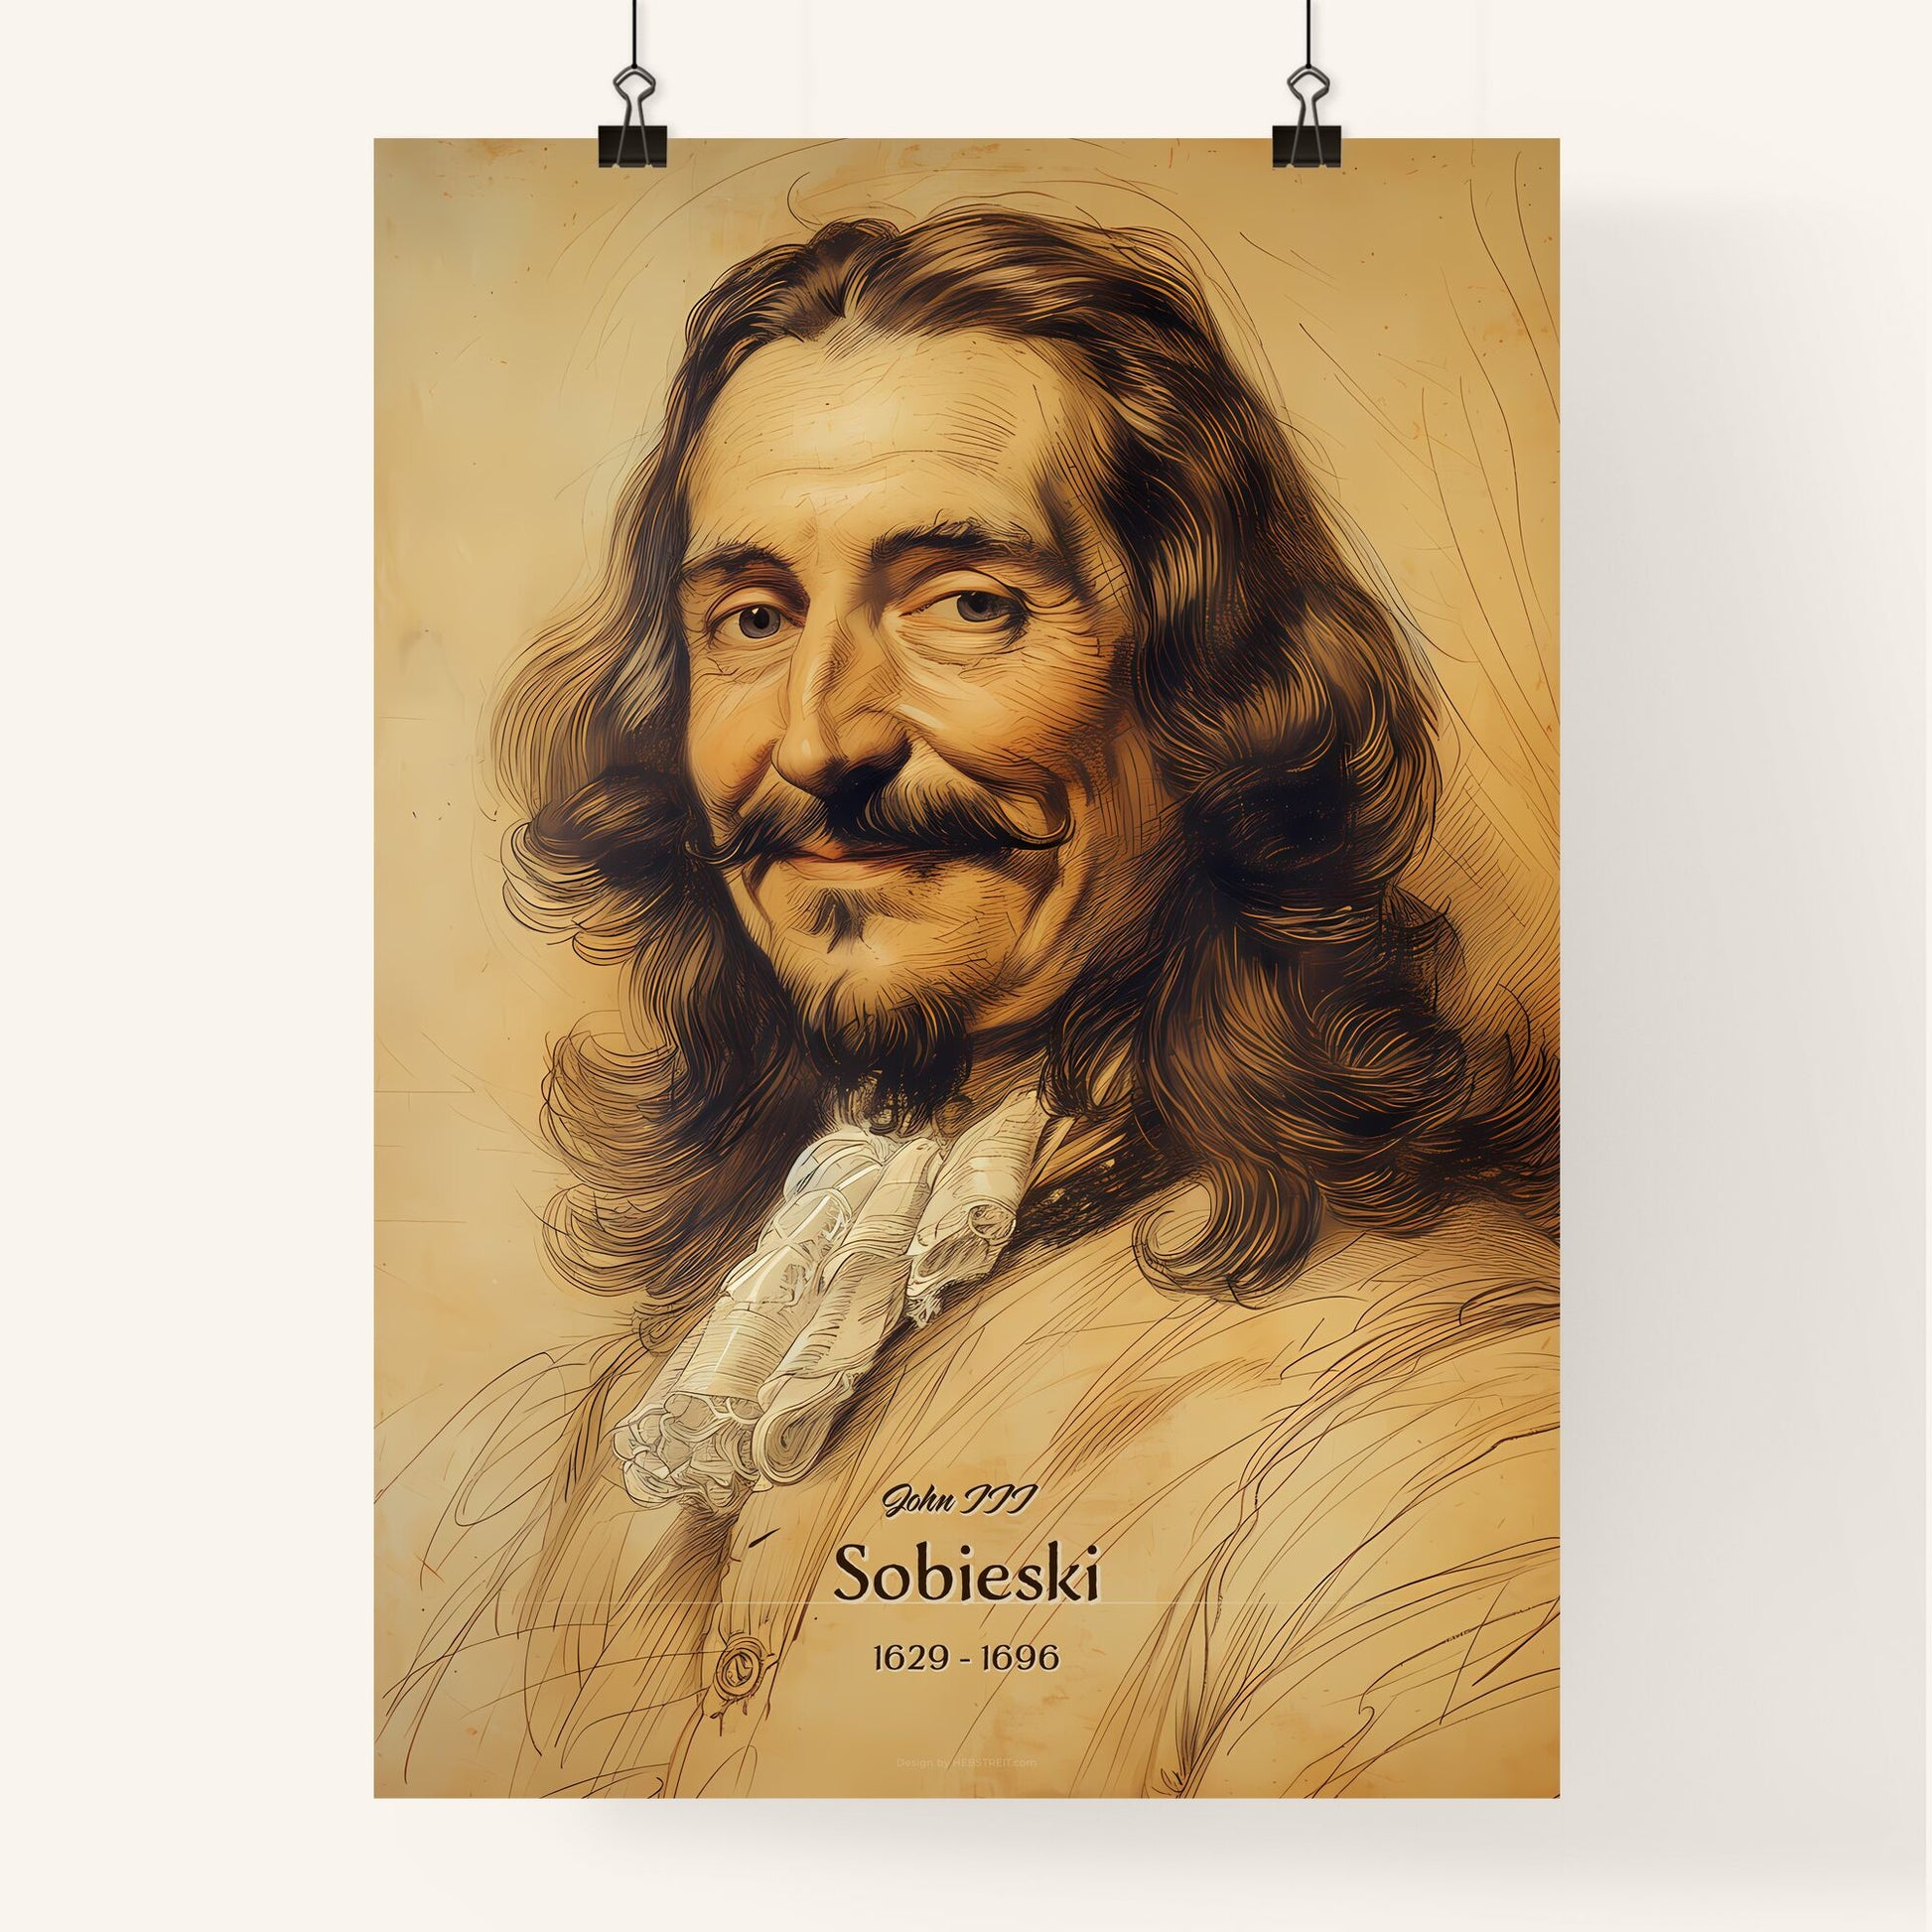 John III , Sobieski, 1629 - 1696, A Poster of a man with long hair and mustache Default Title